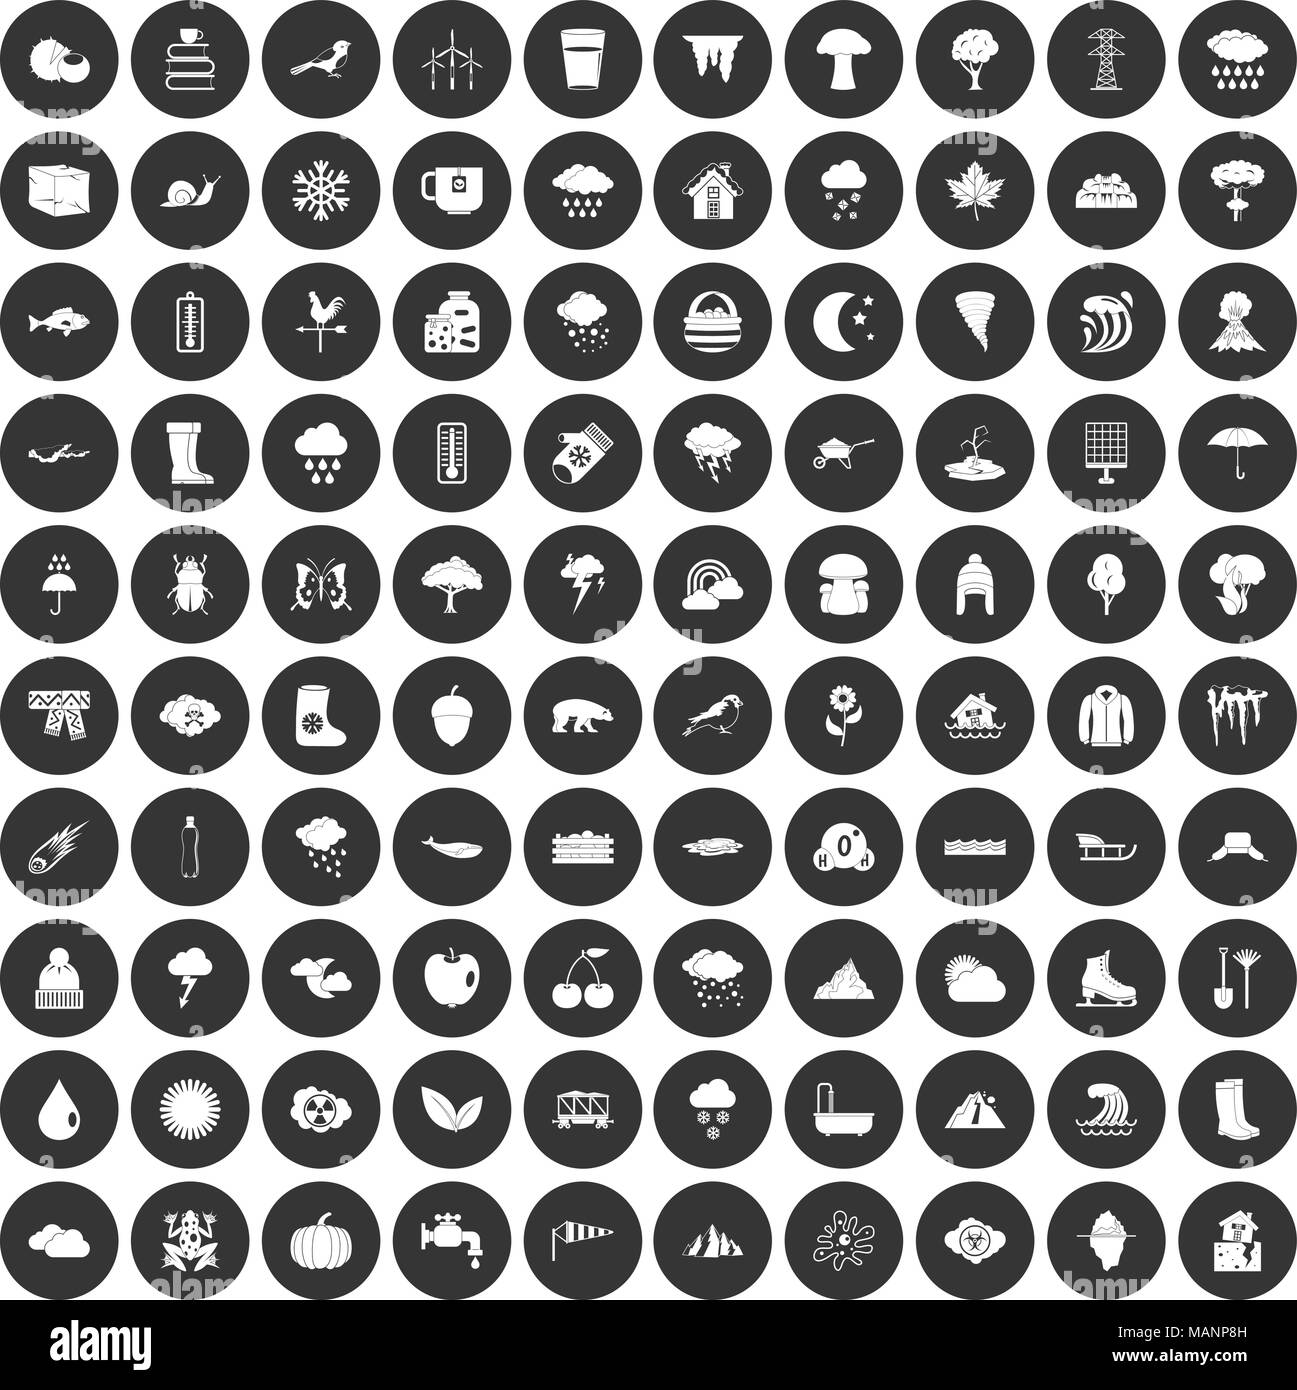 100 clouds icons set black circle Stock Vector